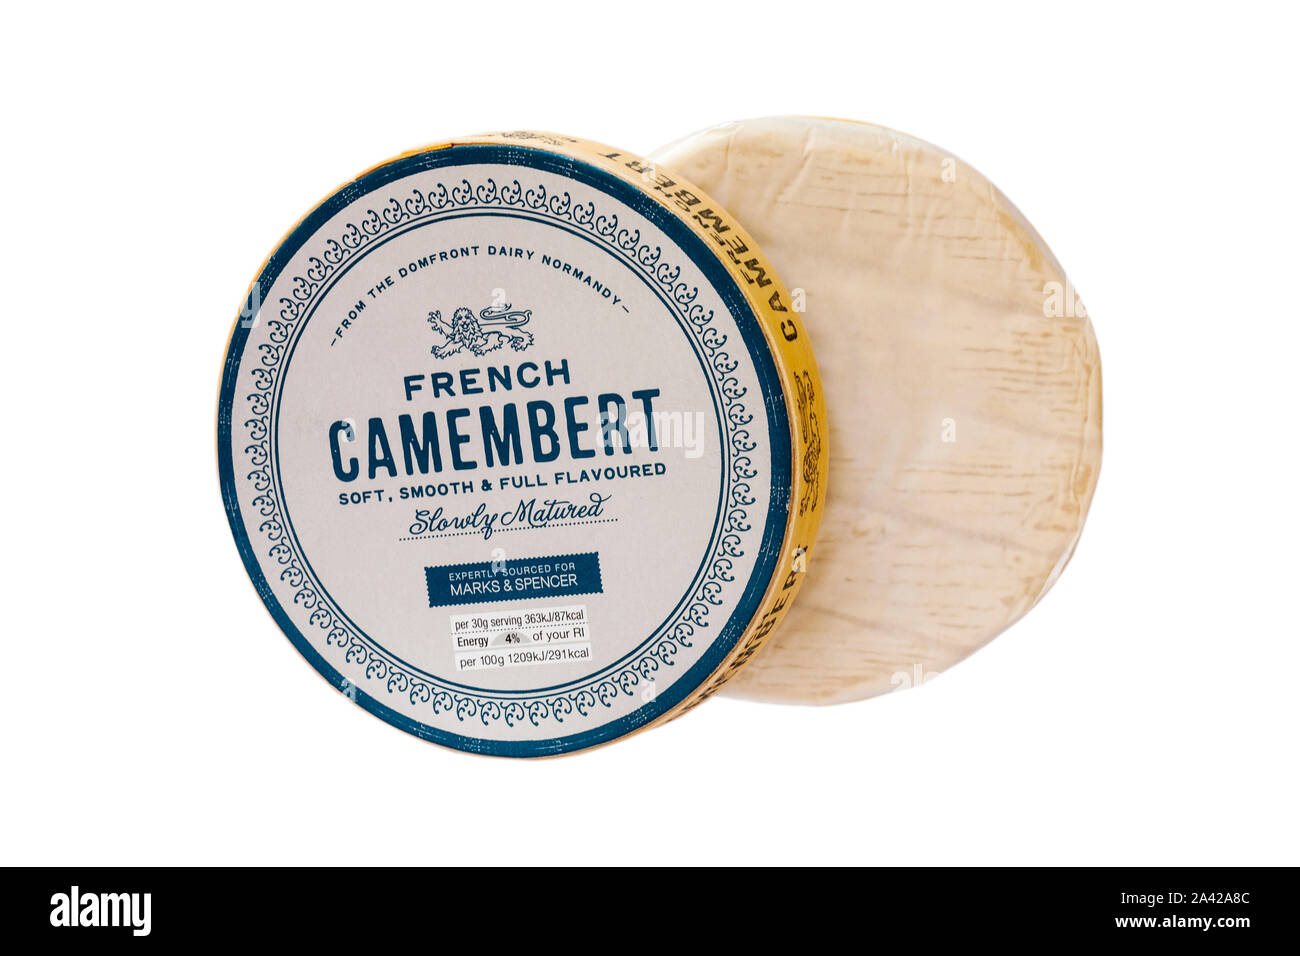 French Camembert soft smooth & full flavoured slowly matured expertly sourced for Marks & Spencer isolated on white background Stock Photo